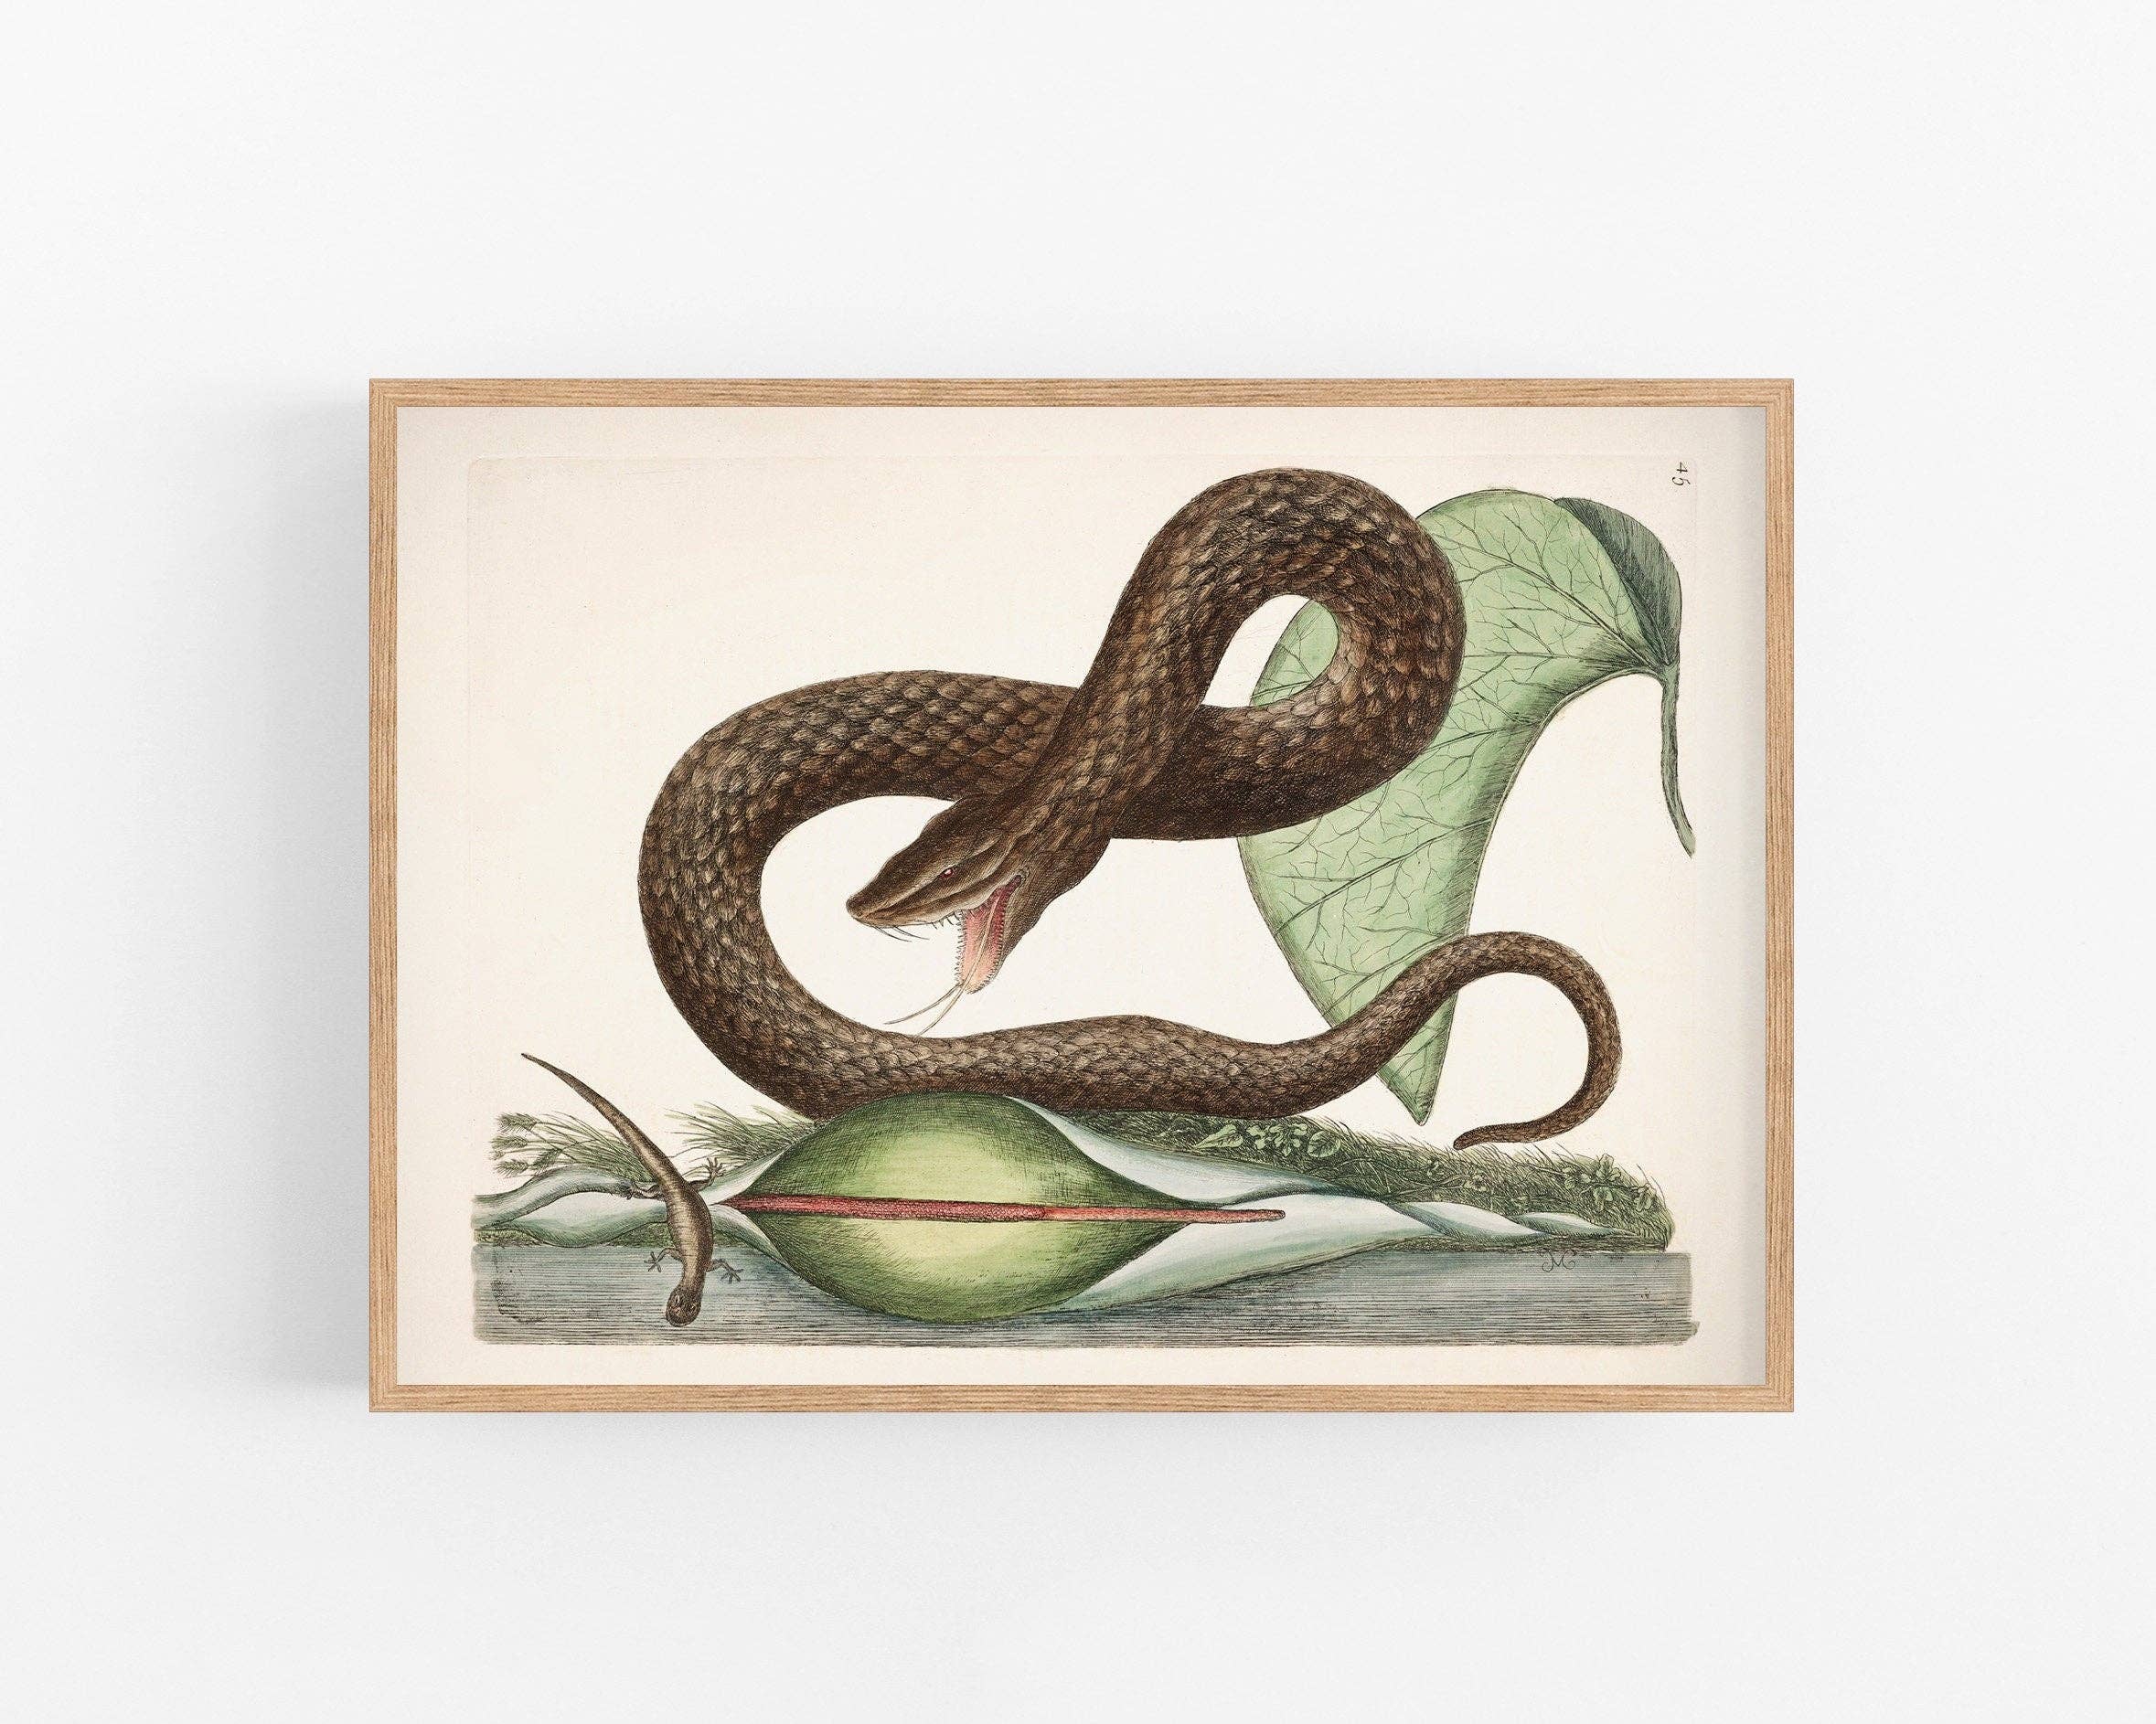 Viper snake, lizard and arum lily print